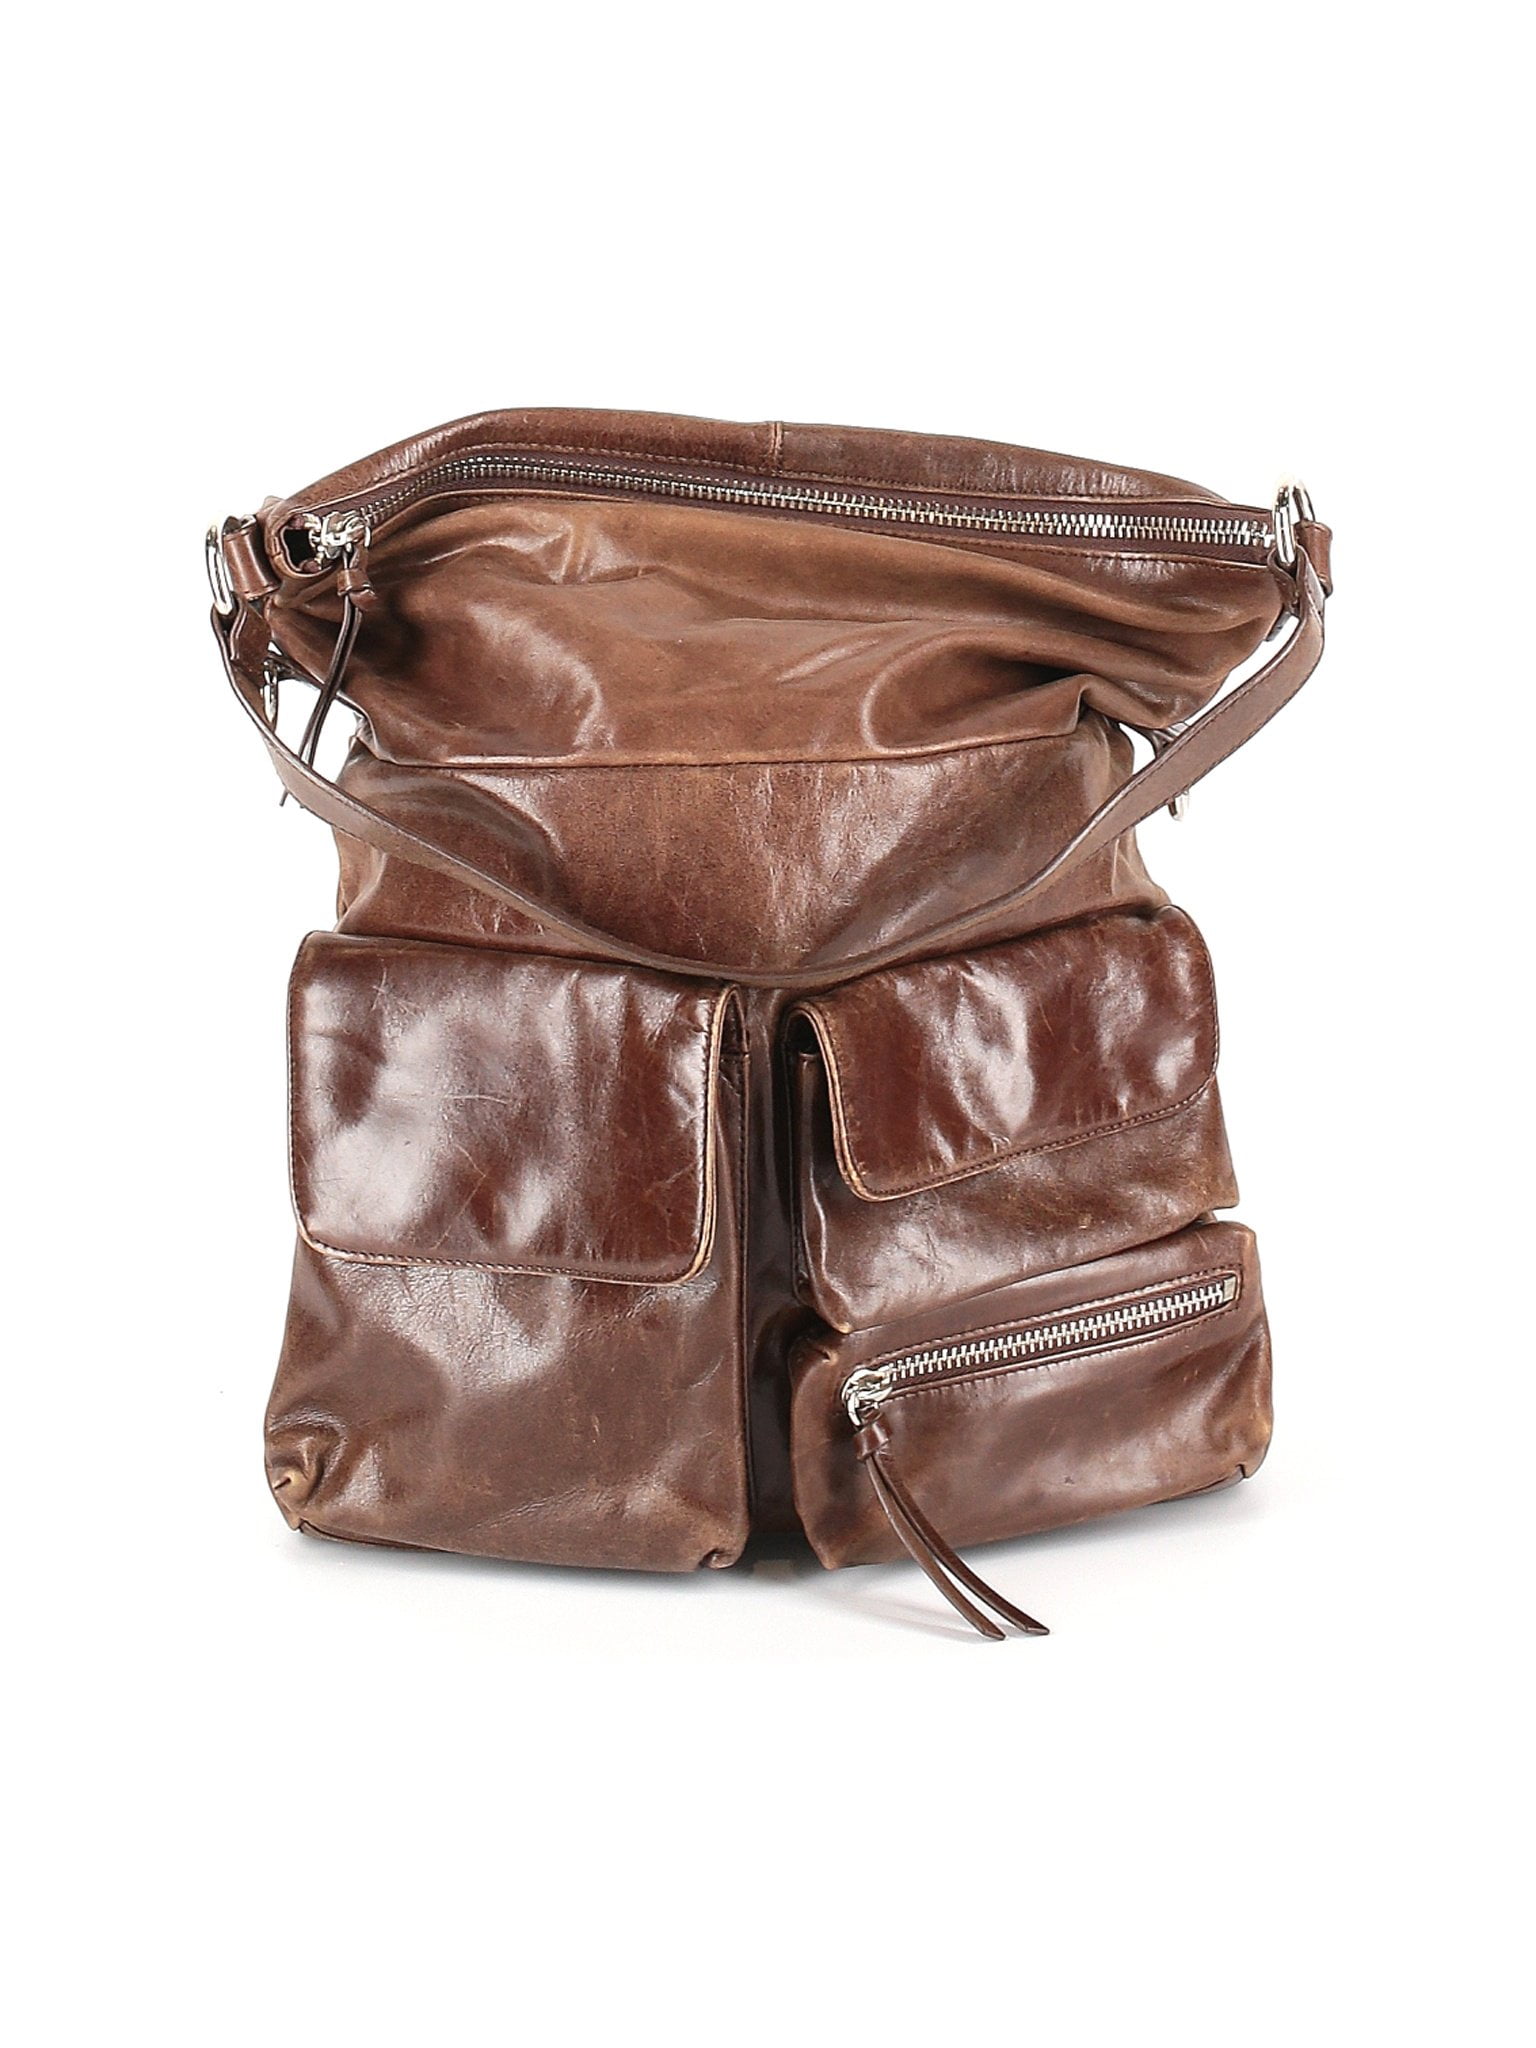 Hobo - Pre-Owned Hobo The Original Women&#39;s One Size Fits All Leather Shoulder Bag - www.waterandnature.org ...